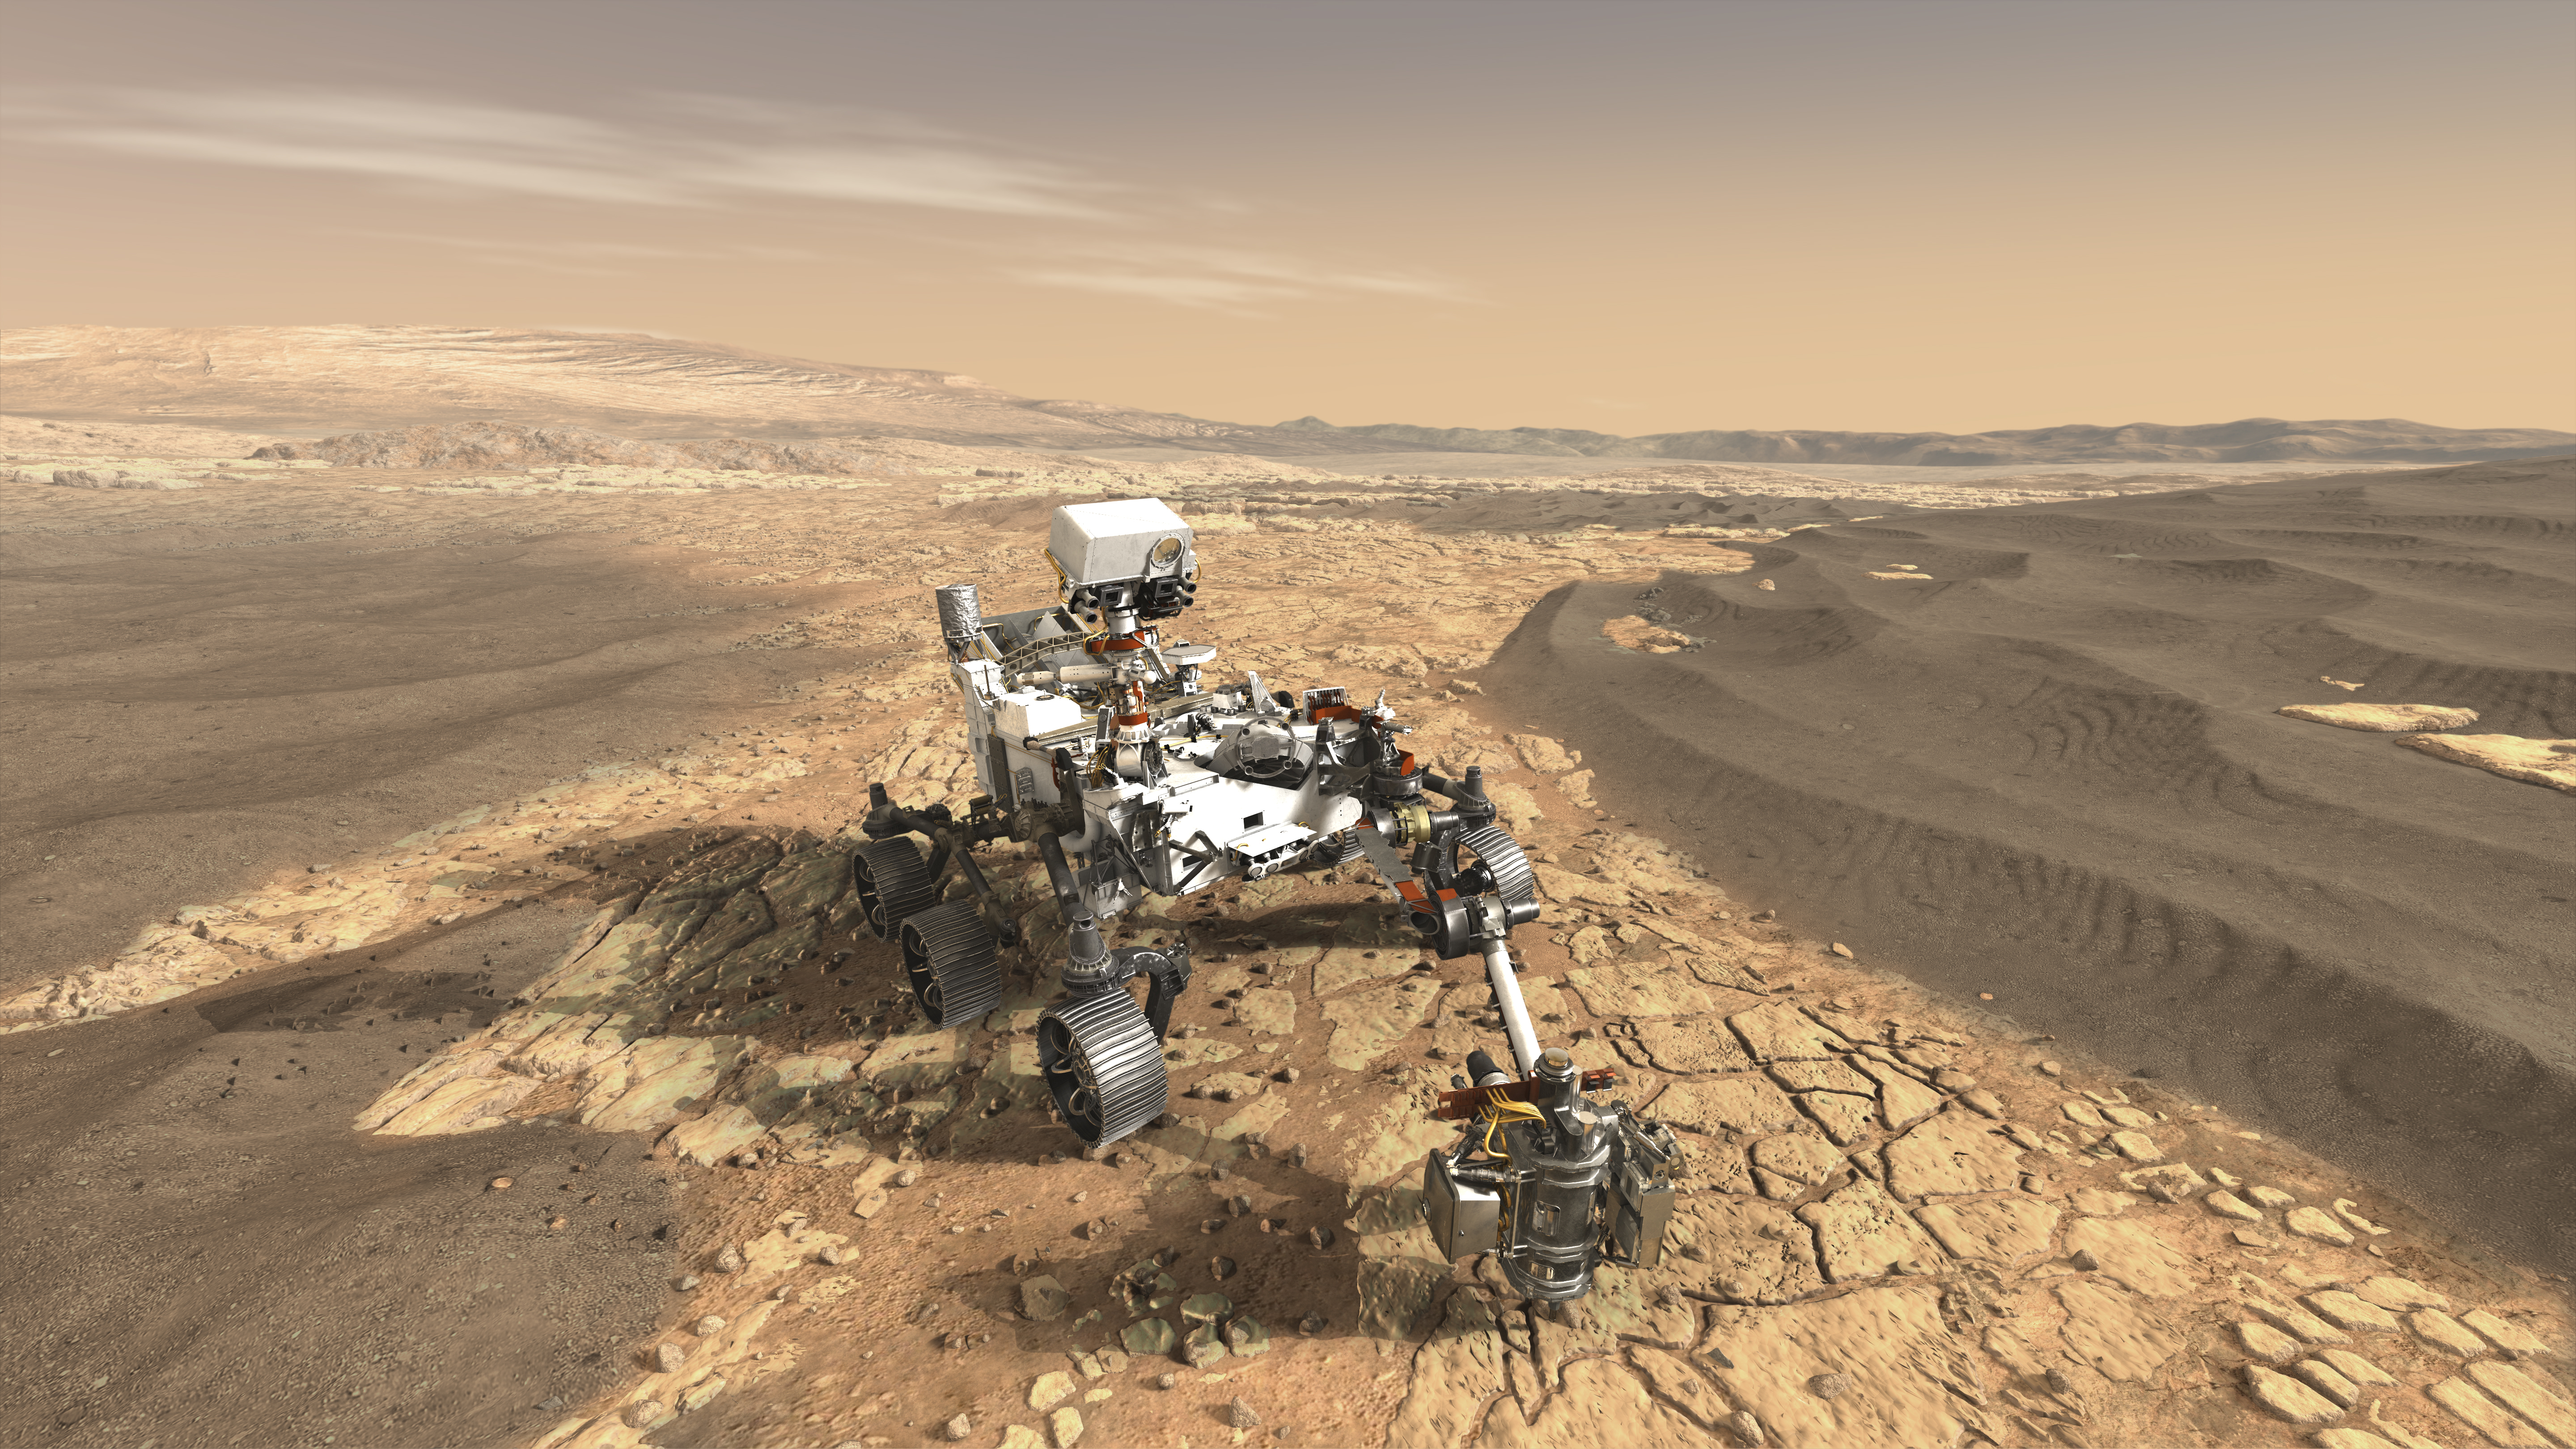 Details about the Mars 2020 Rover